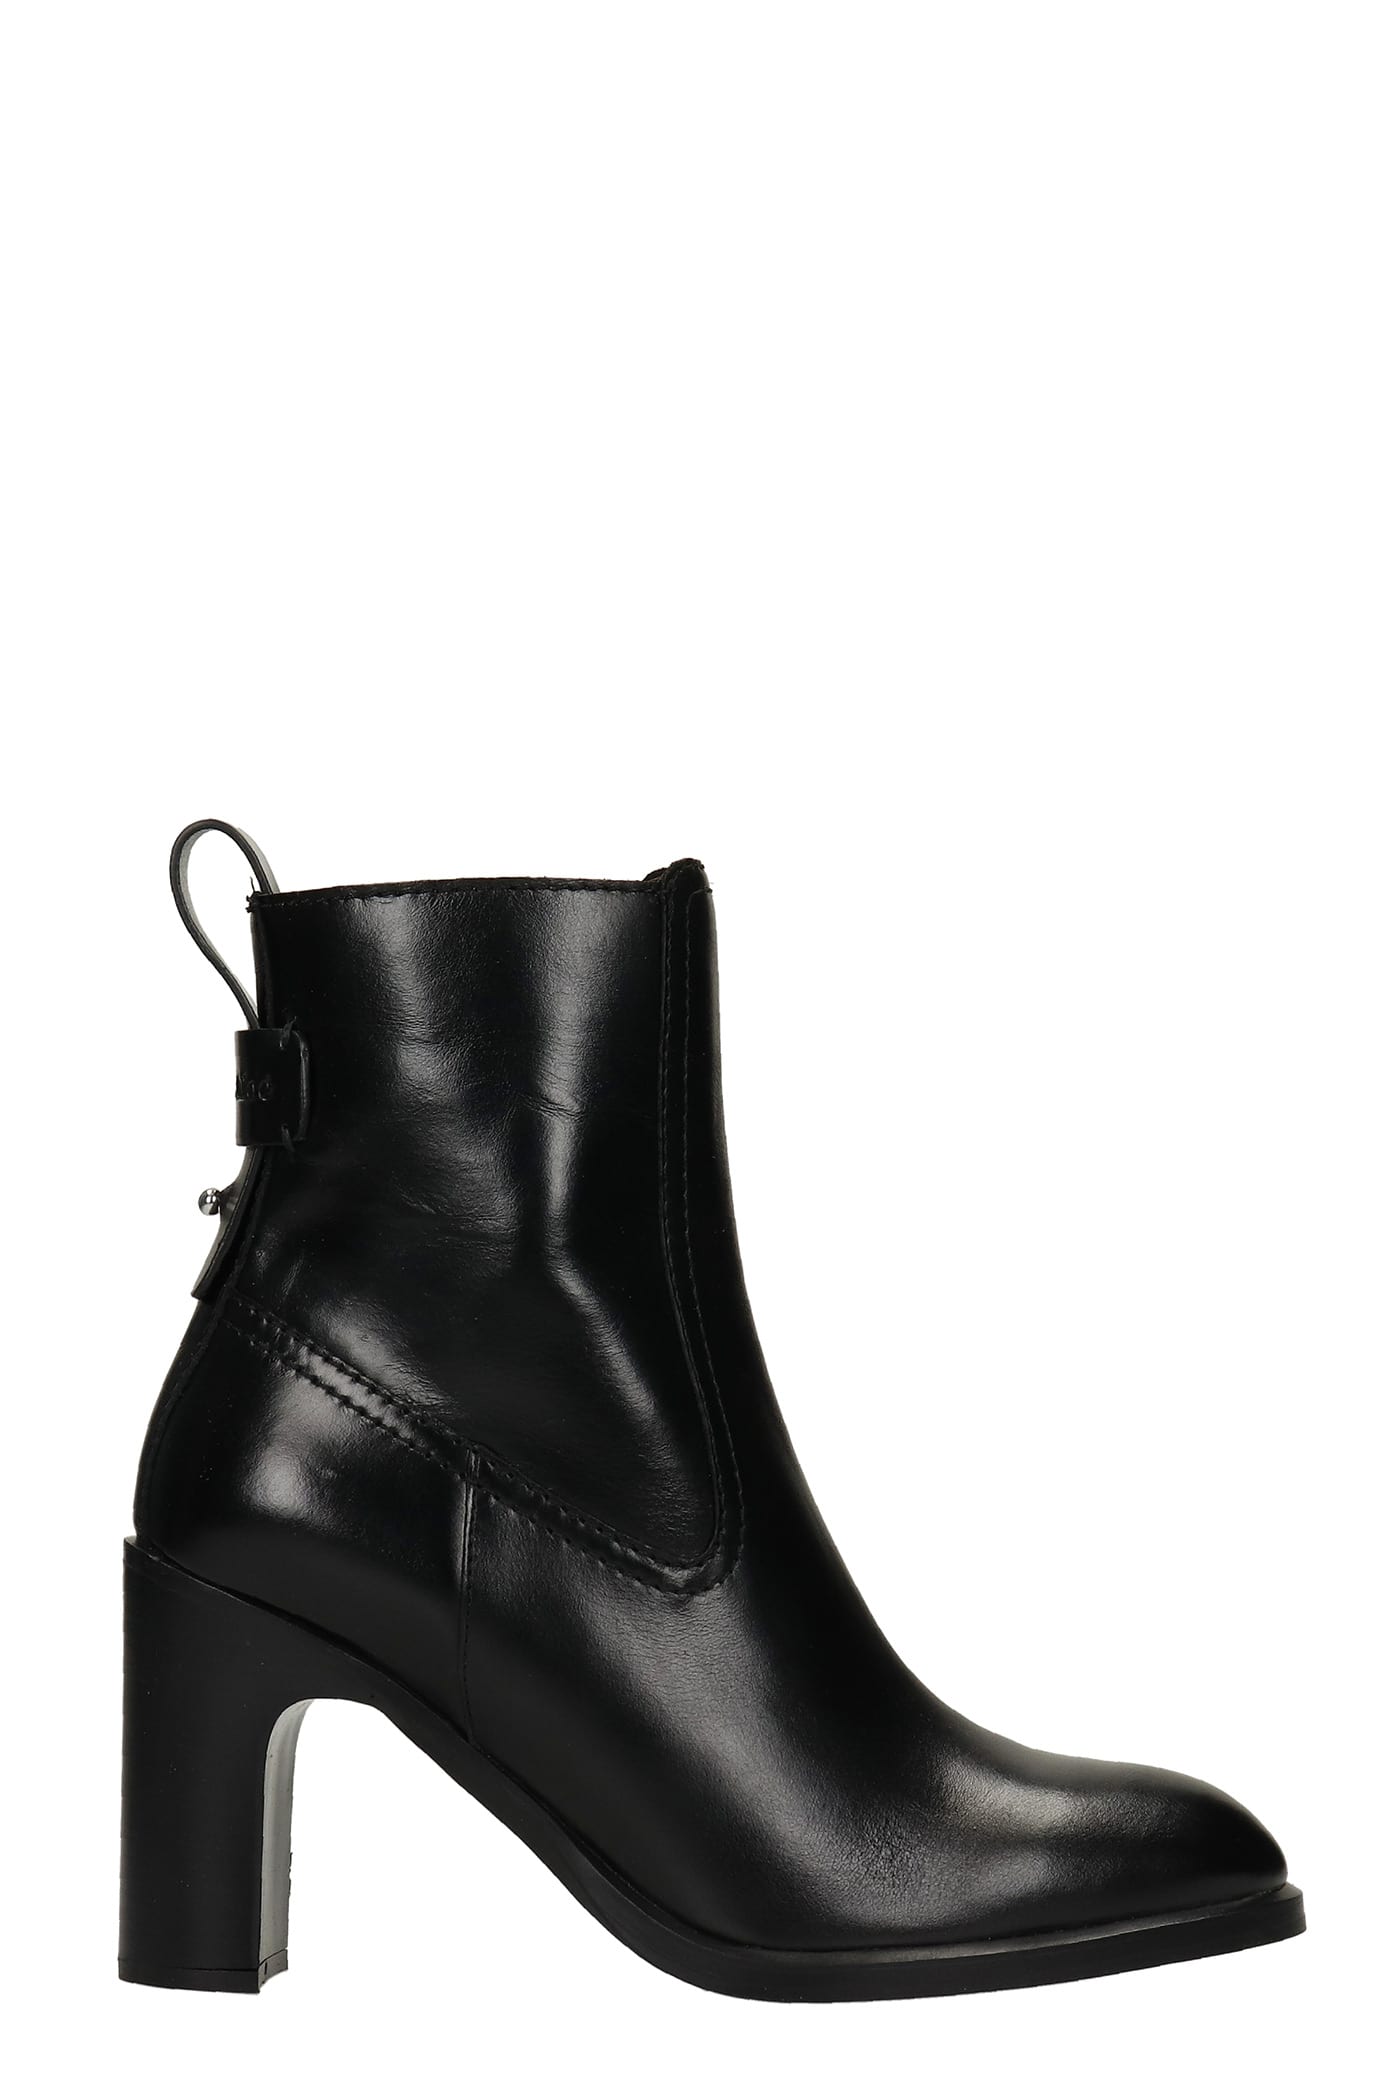 See by Chloé Annylee High Heels Ankle Boots In Black Leather